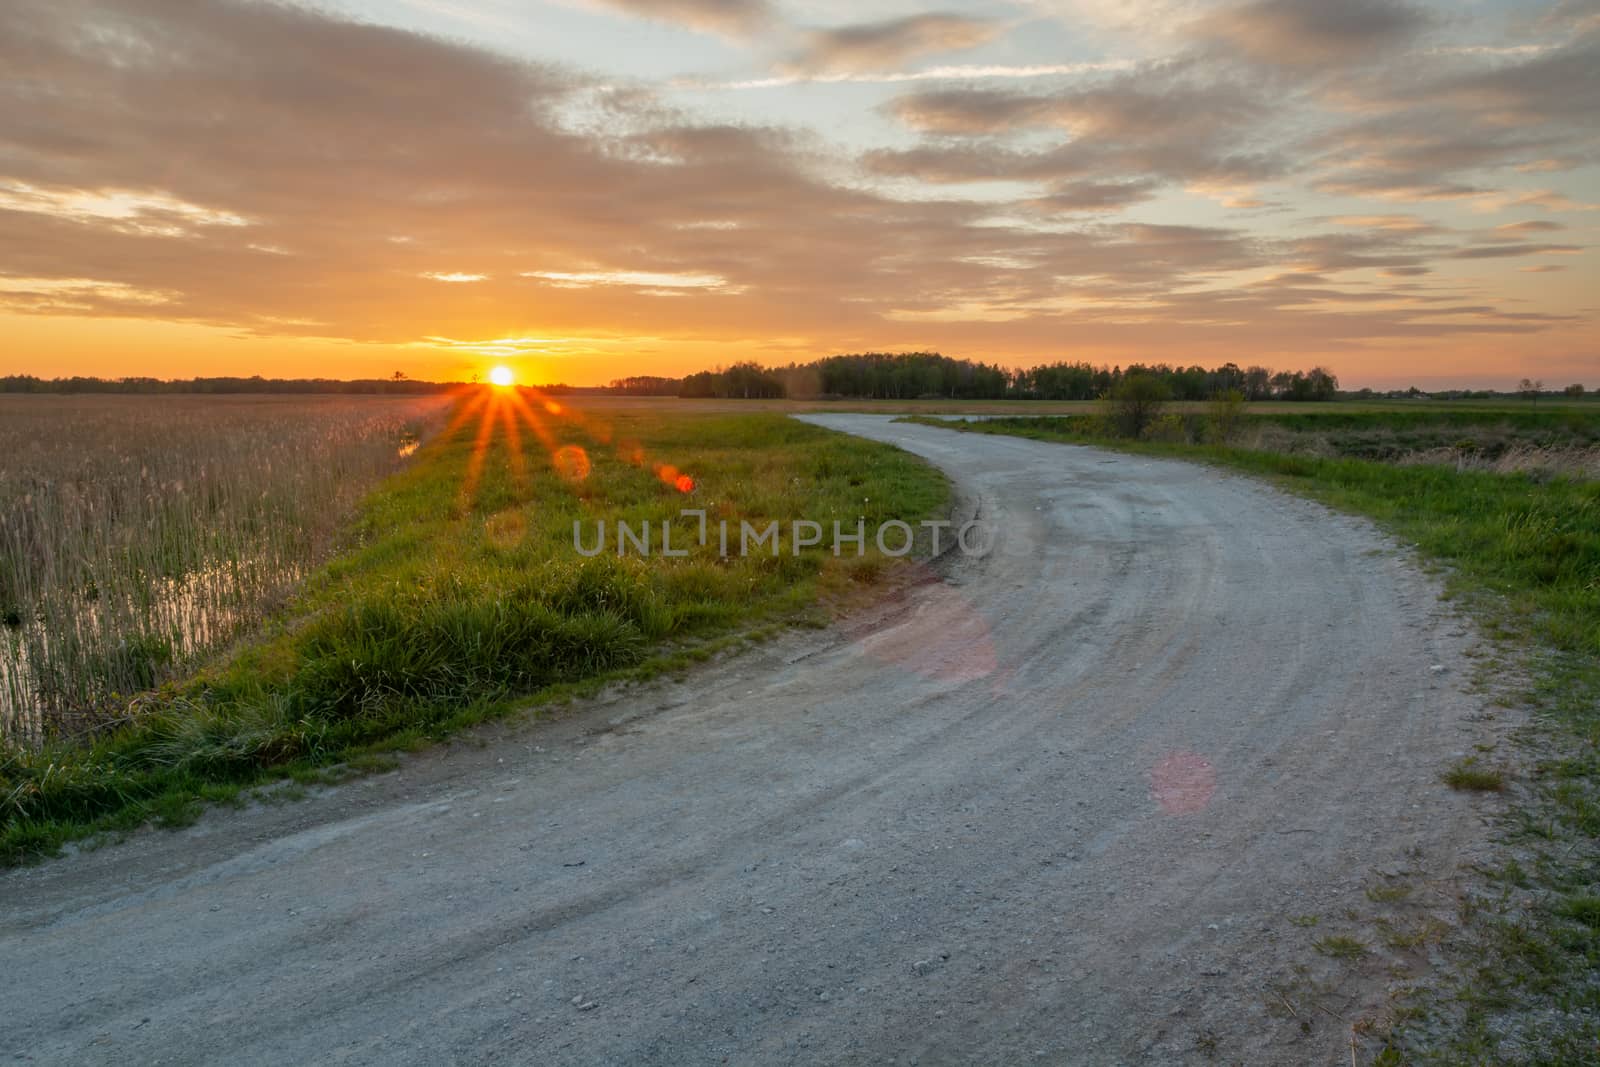 The glow of the setting sun and a turn on a gravel road, spring evening view